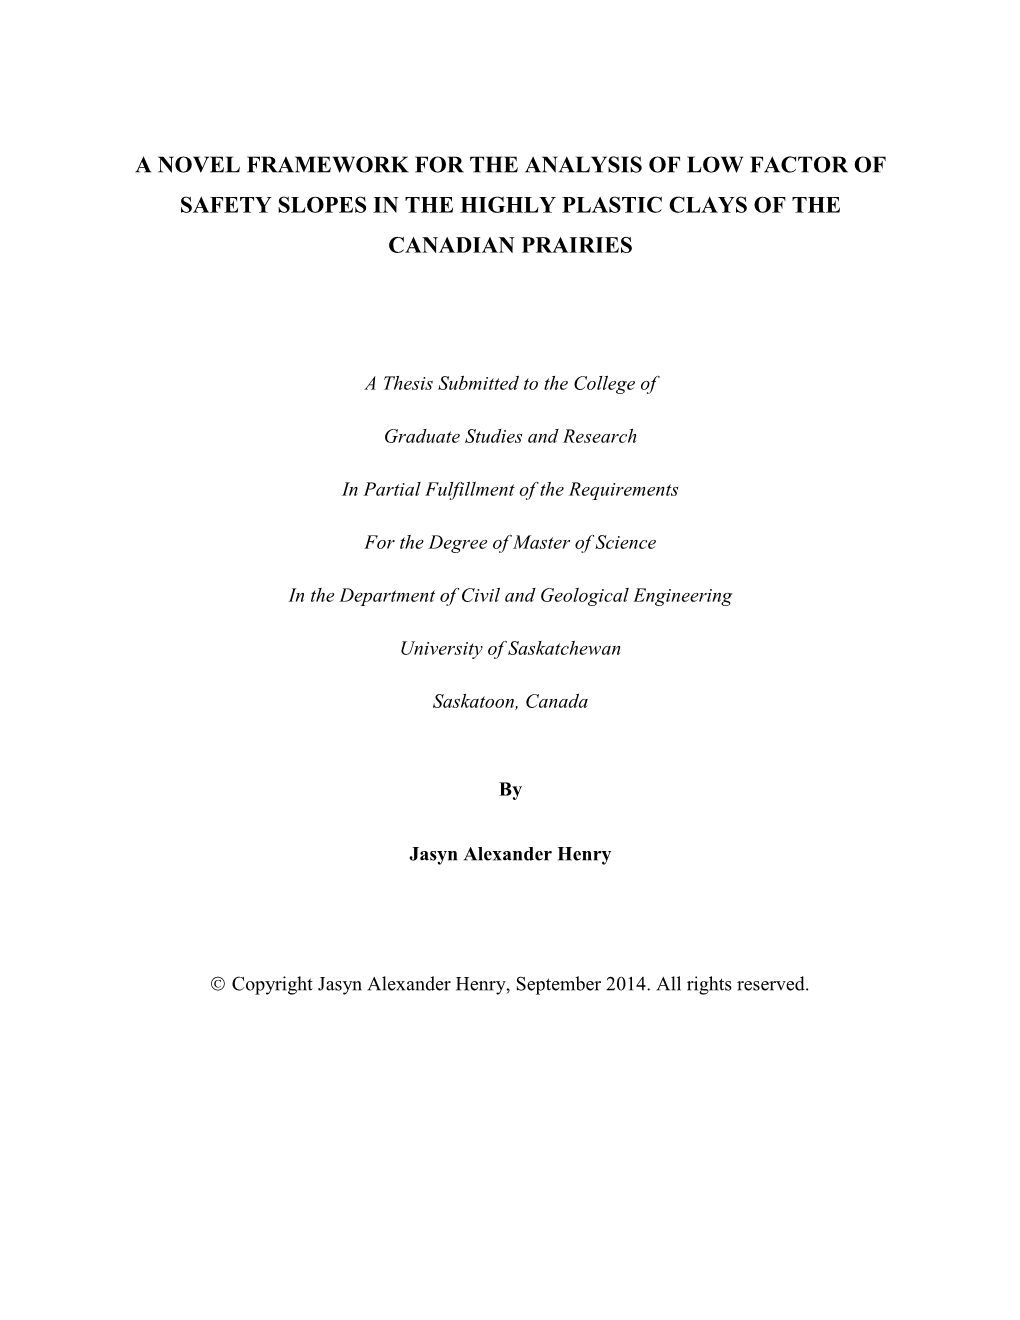 A Novel Framework for the Analysis of Low Factor of Safety Slopes in the Highly Plastic Clays of the Canadian Prairies